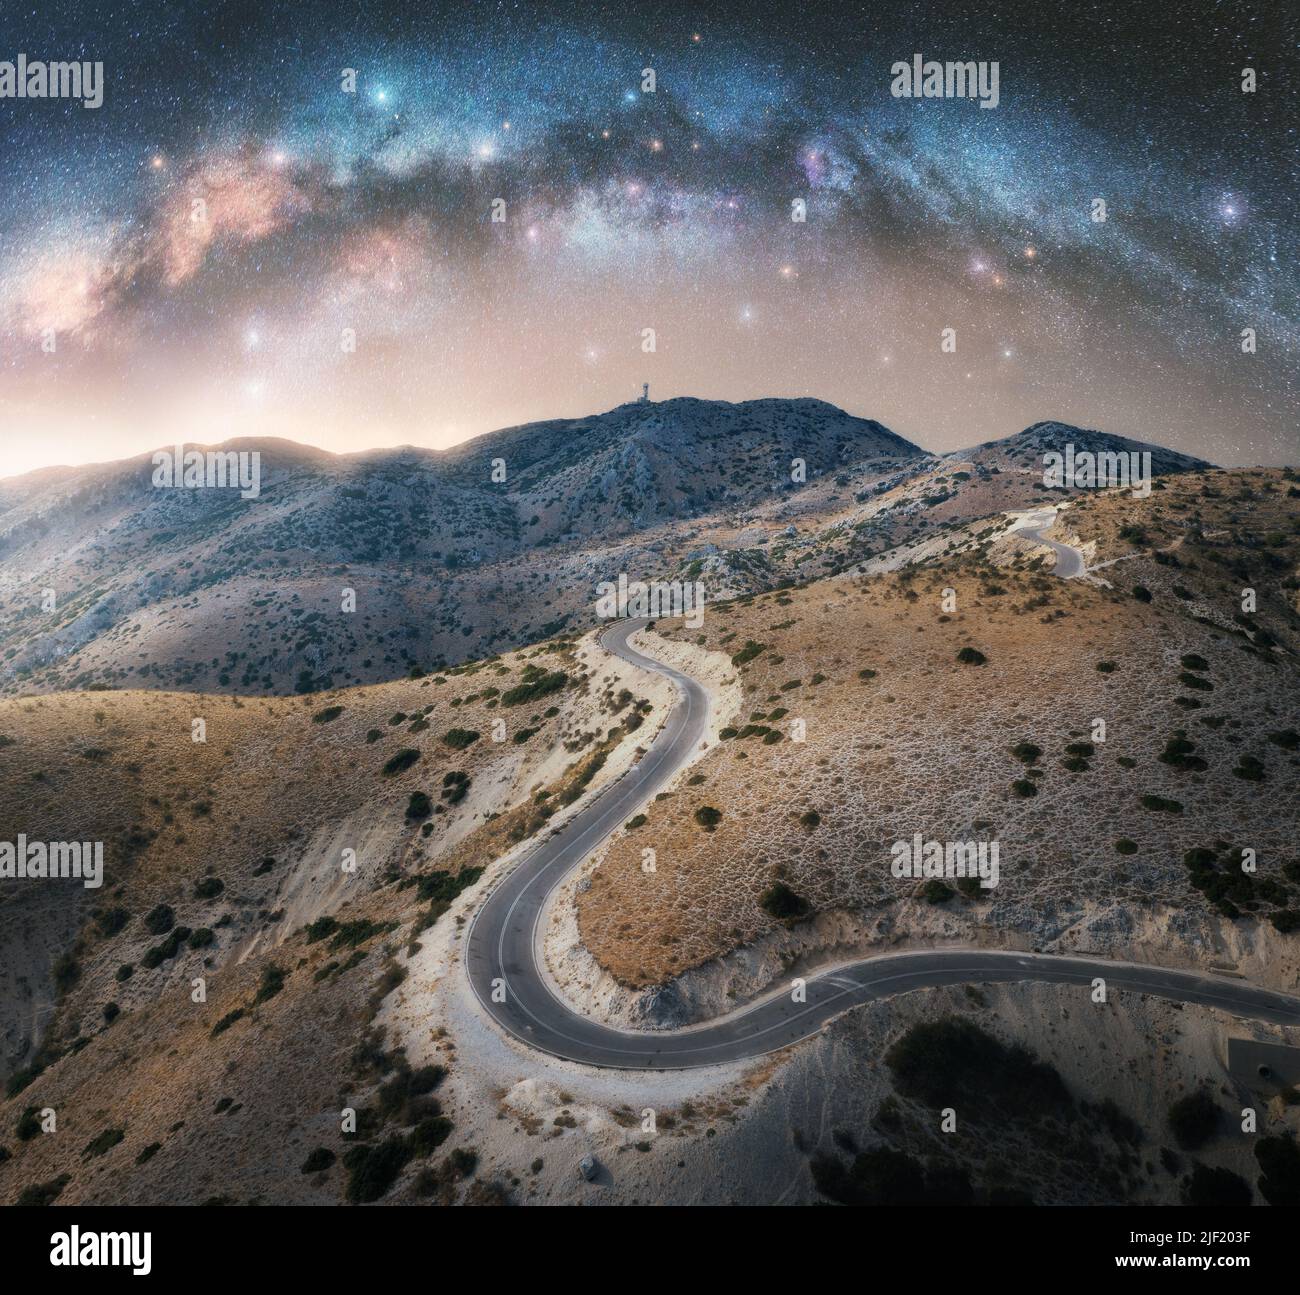 Milky Way arch and winding mountain road at night Stock Photo